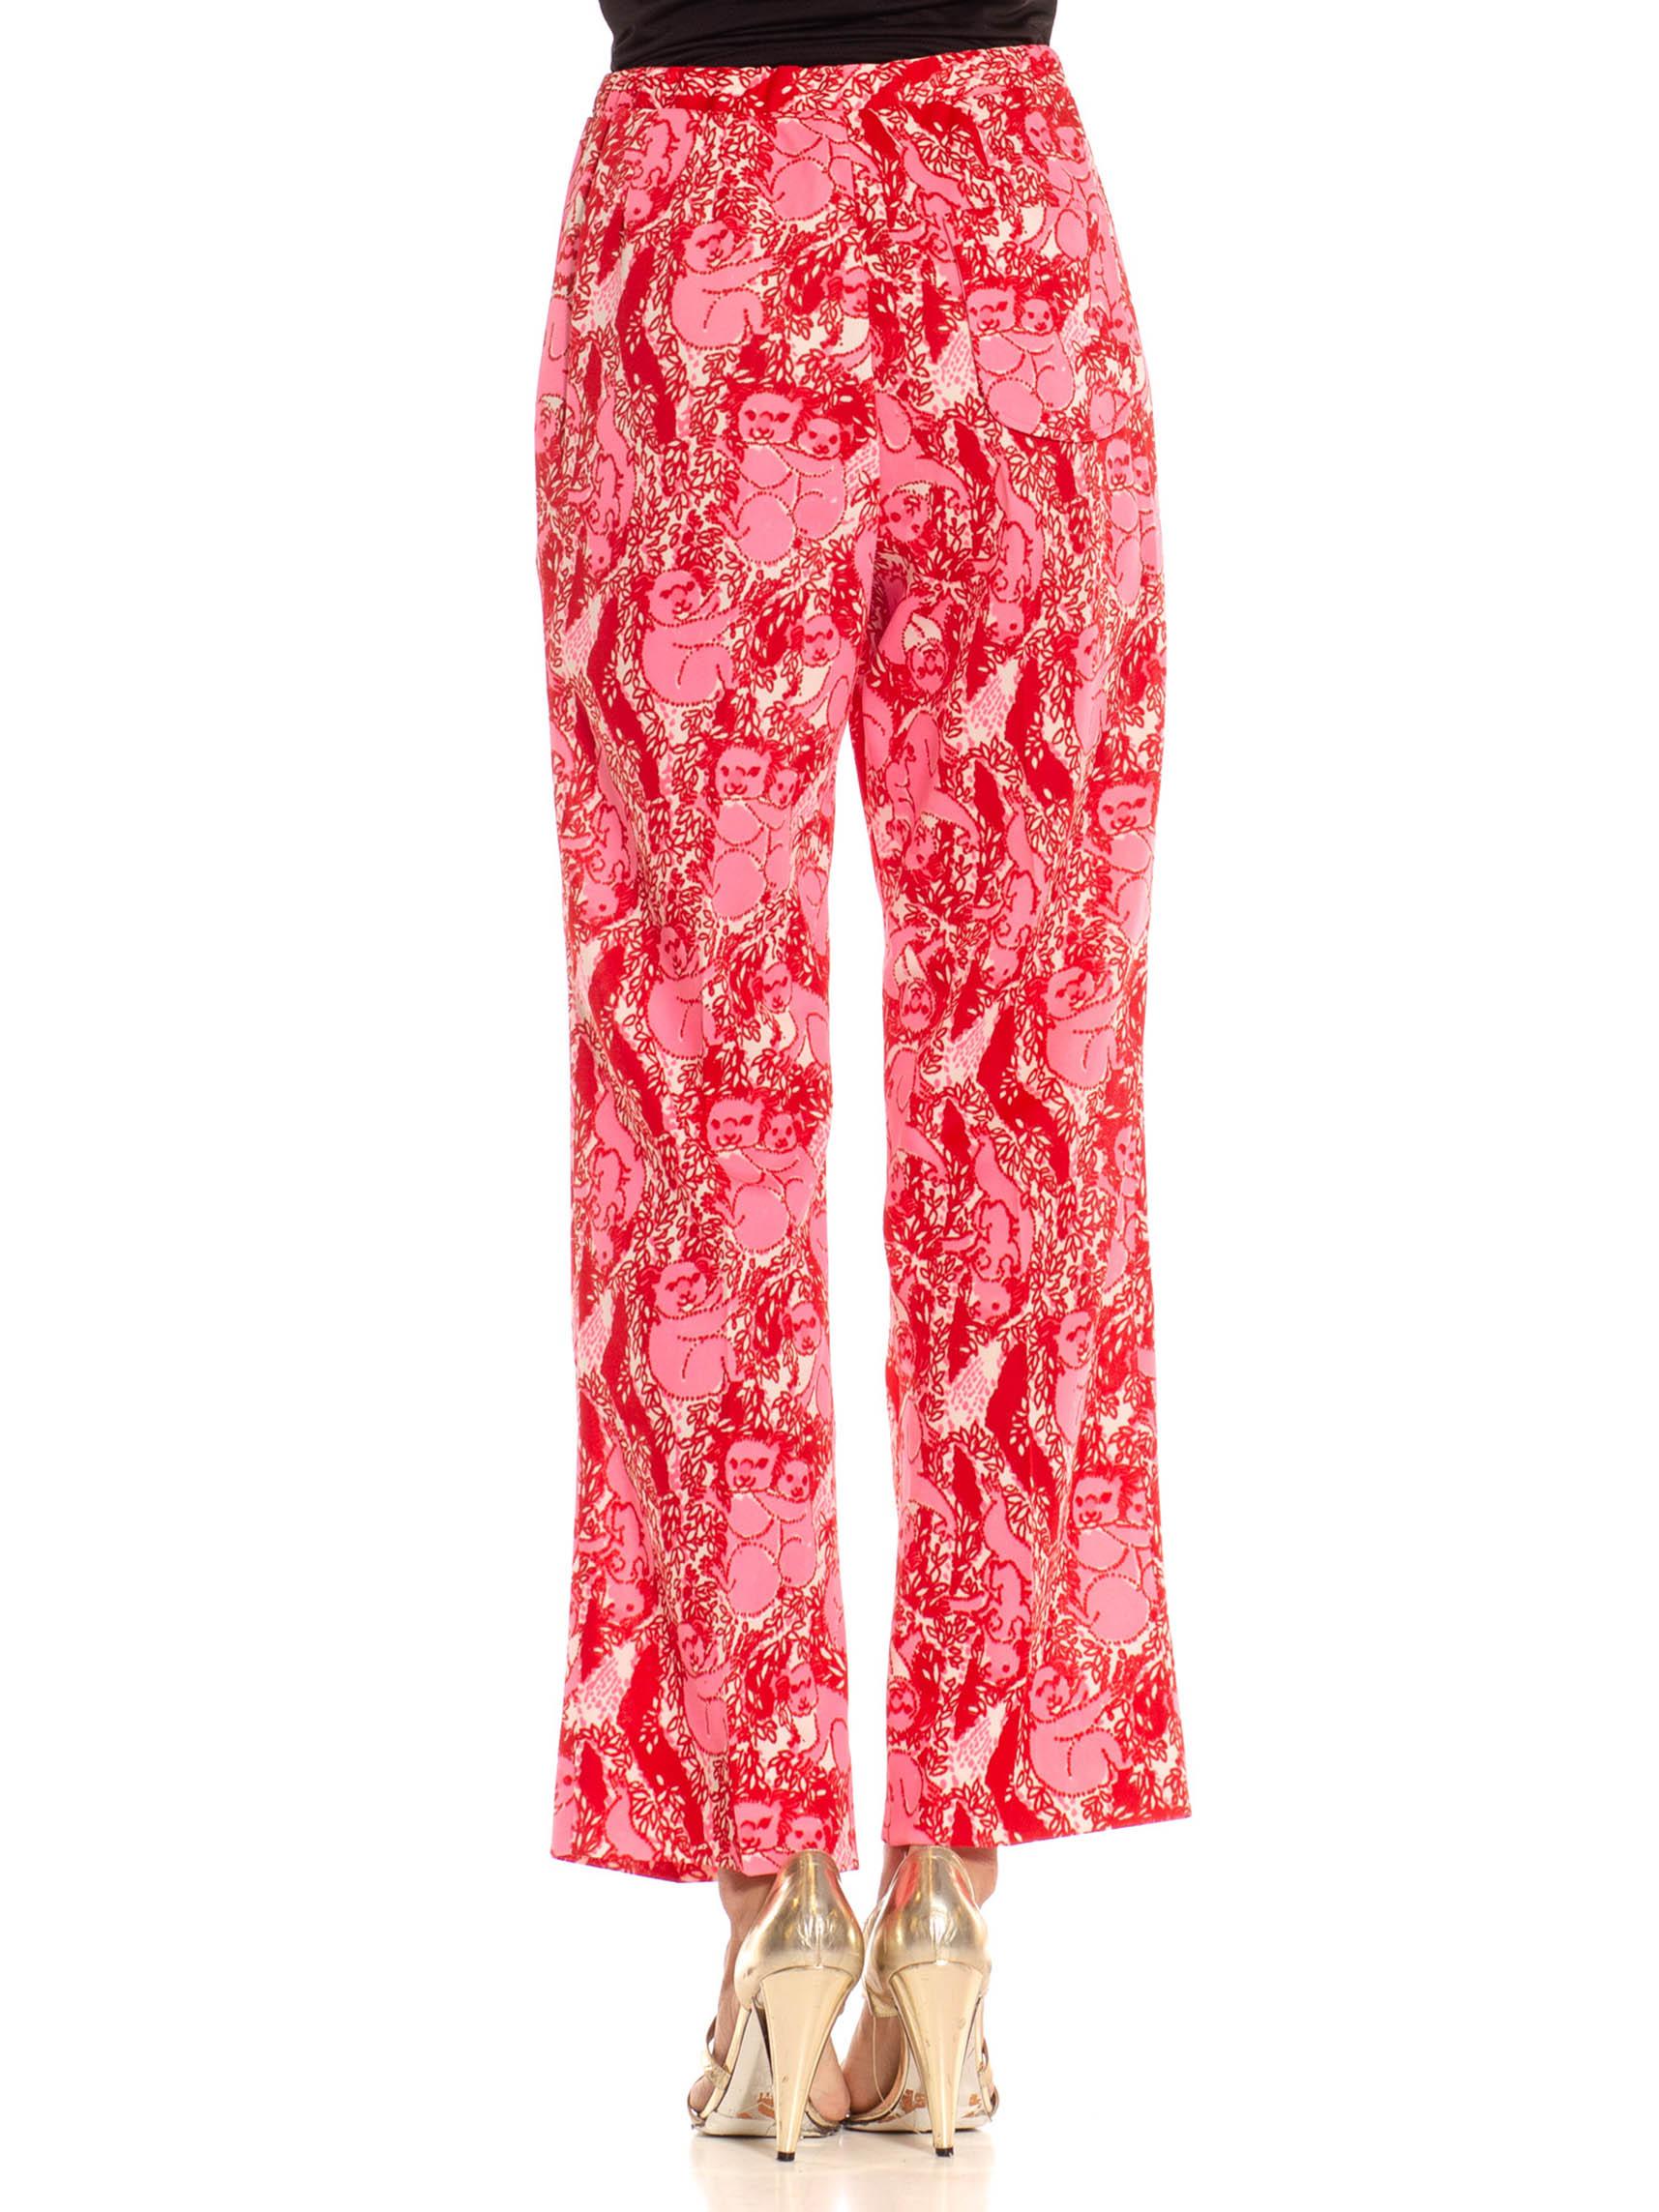 1970S Lilly Pulitzer Pink & Red Polyester Stretch Koala Print Pants 3